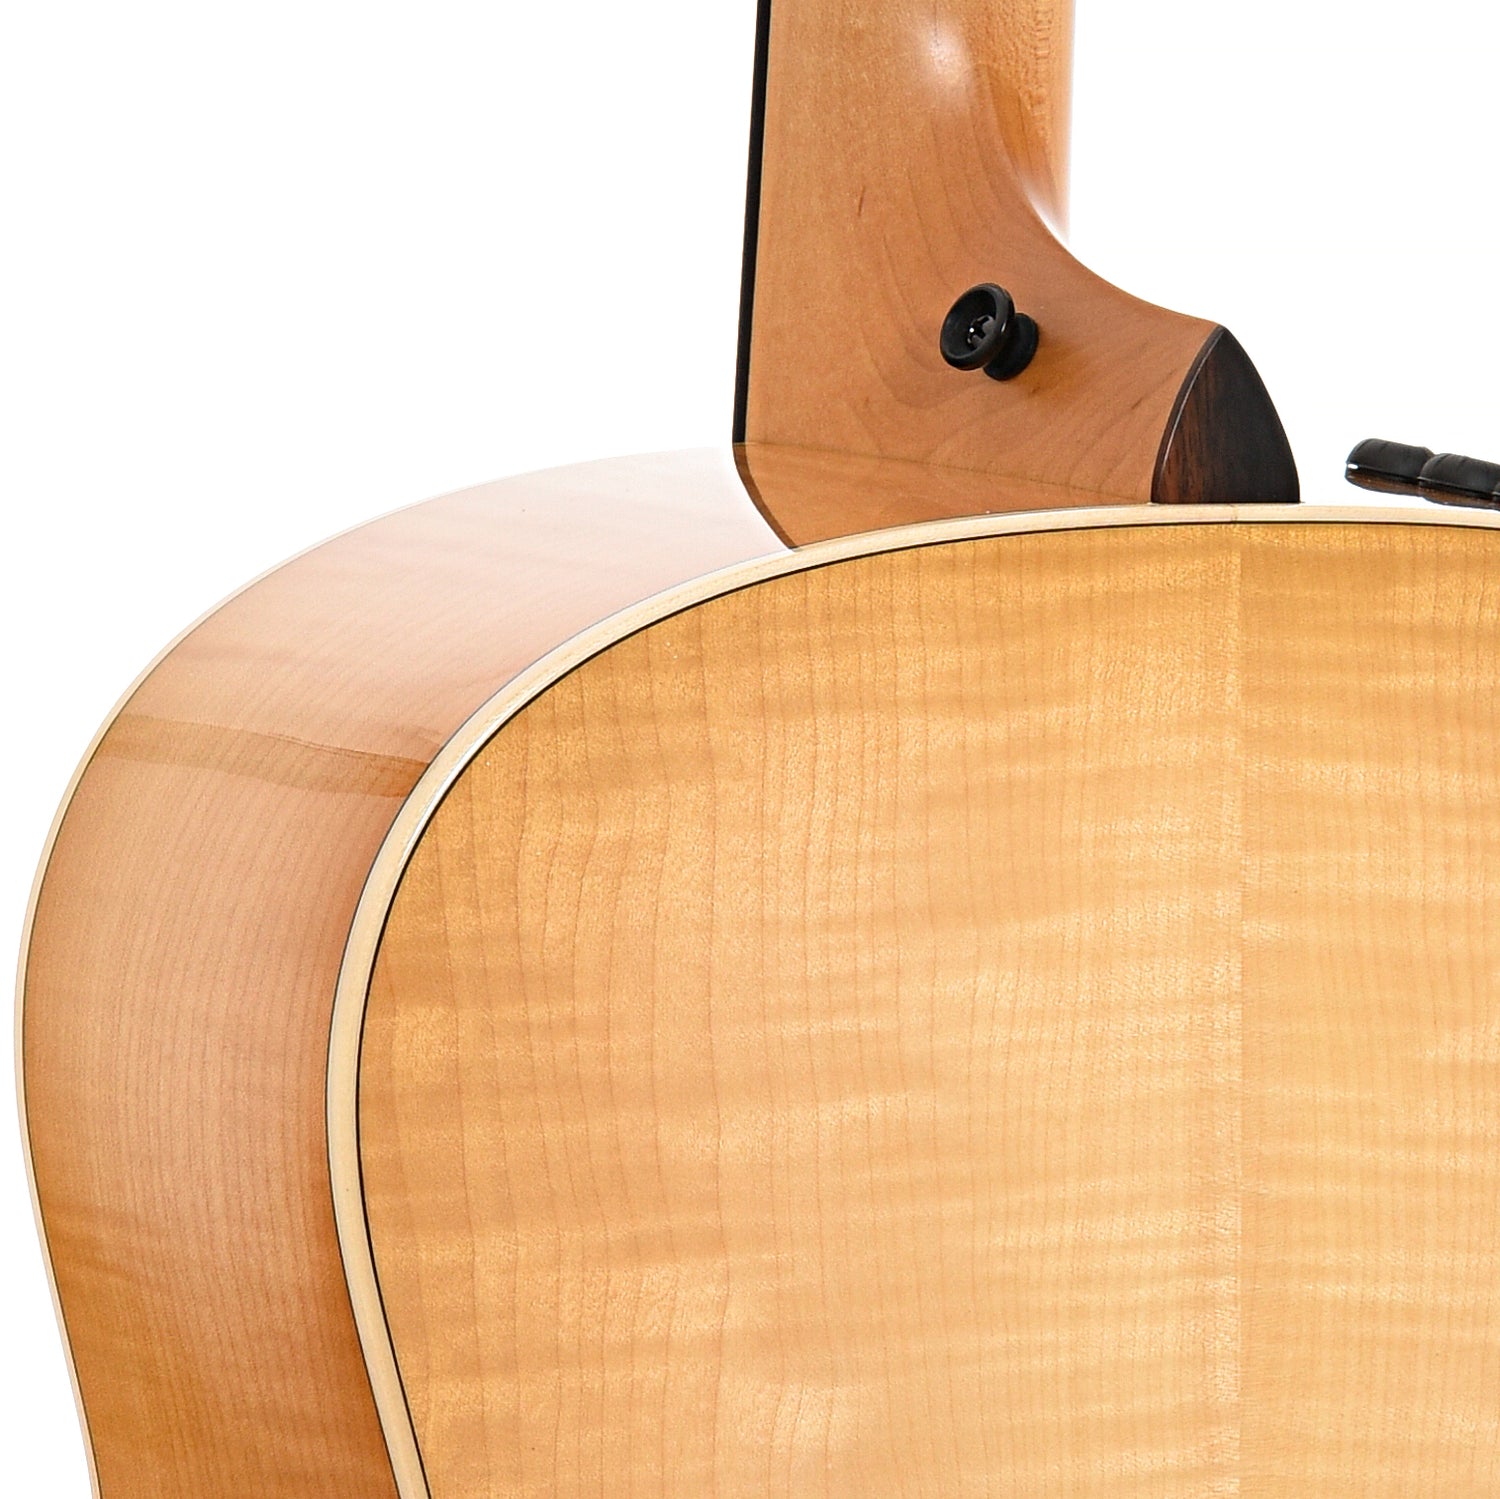 Heel of Taylor 618e Acoustic-Electric 